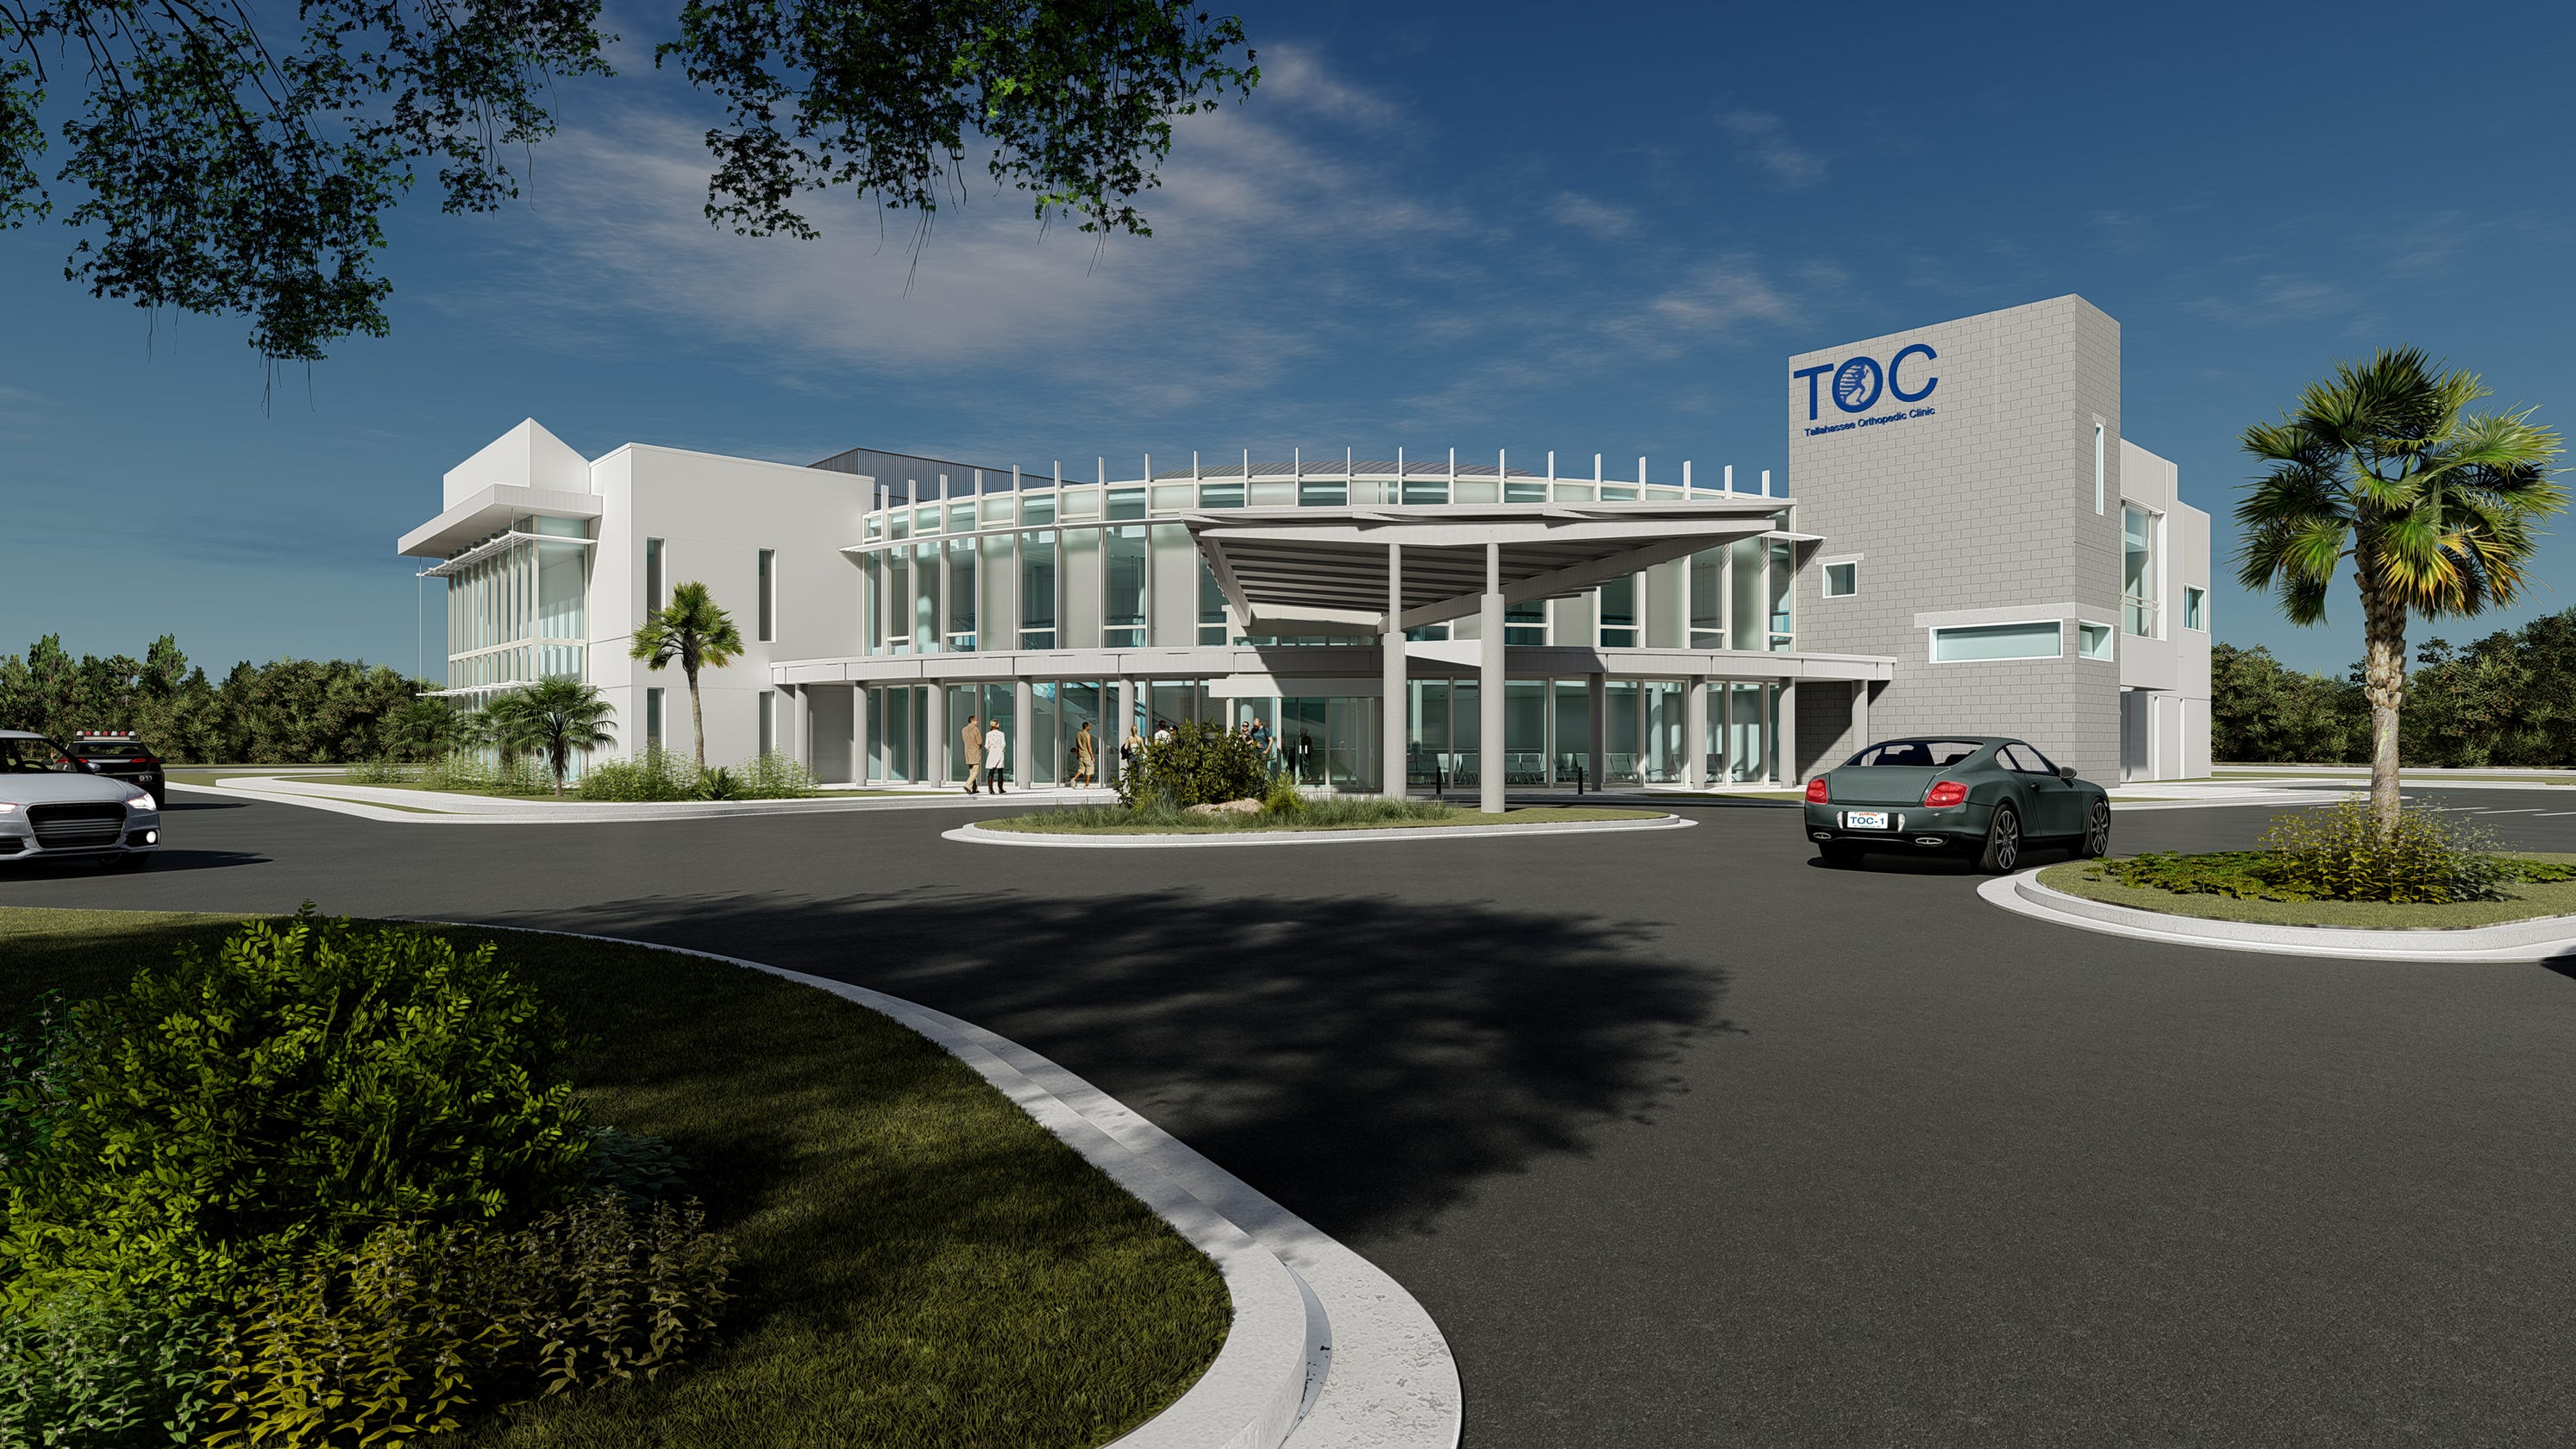 Tallahassee Orthopedic Clinic plans new clinic
